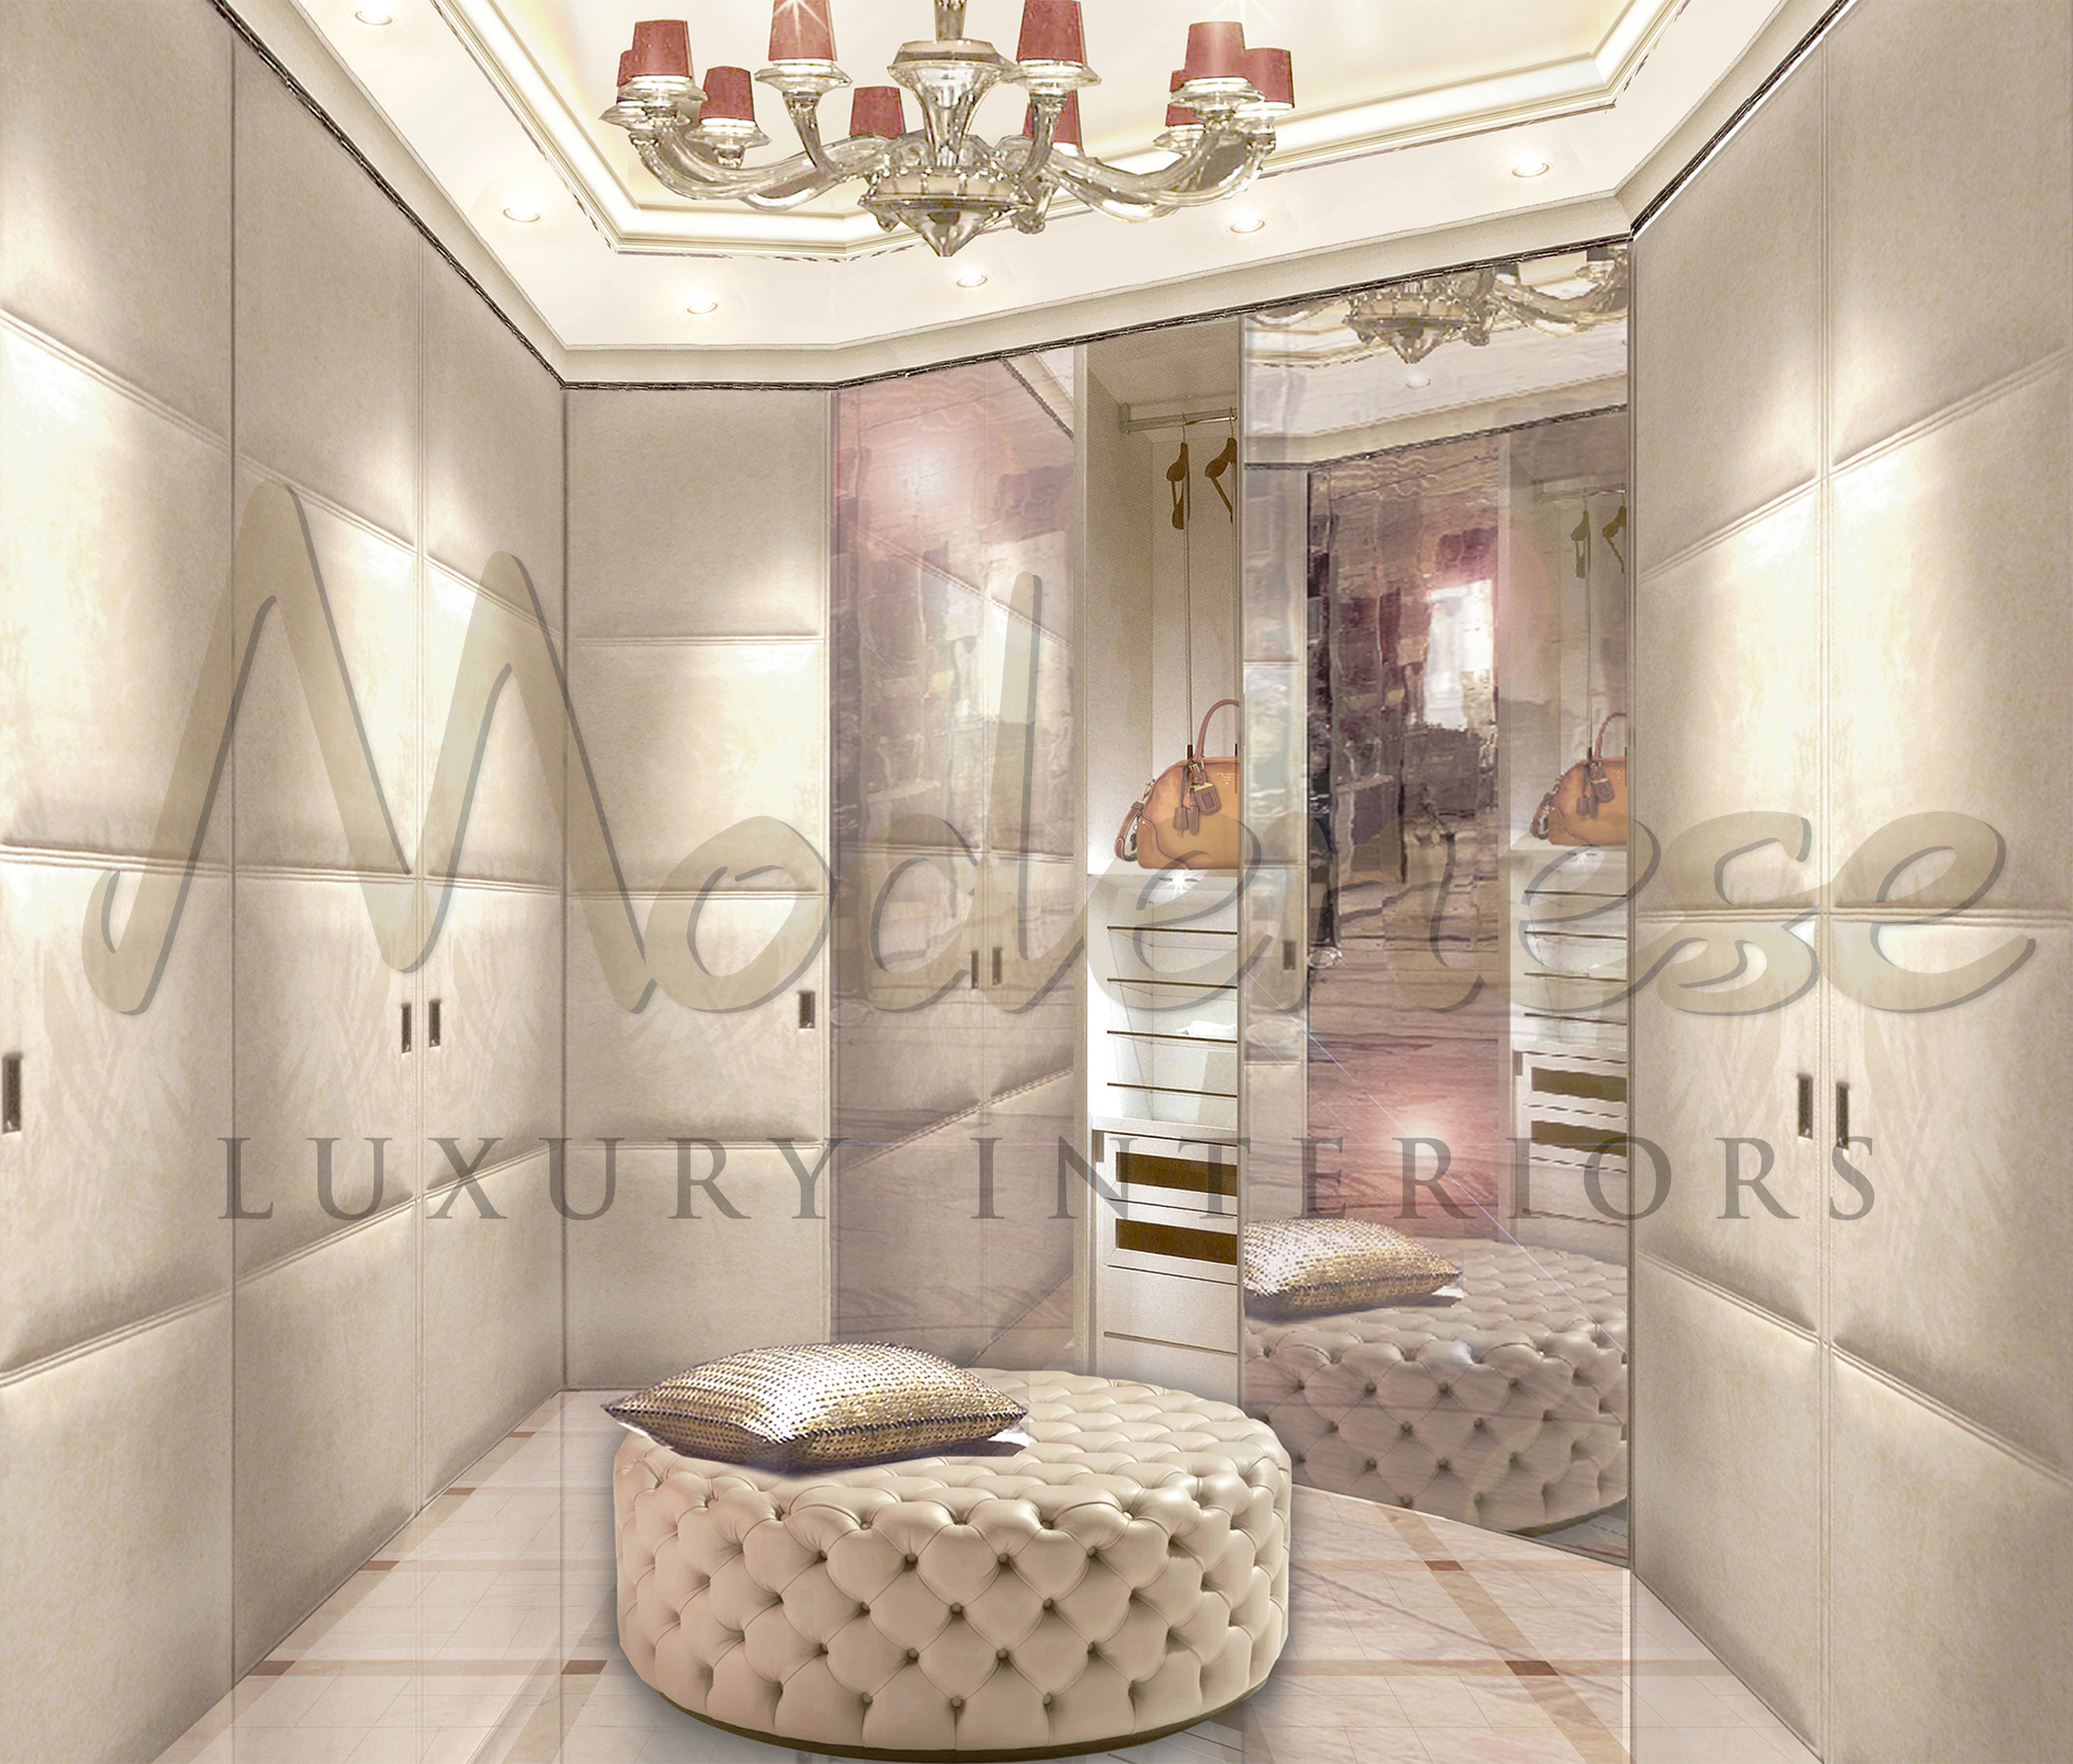 Bespoke High-End Dressing Rooms For Villa in Luanda, Angola